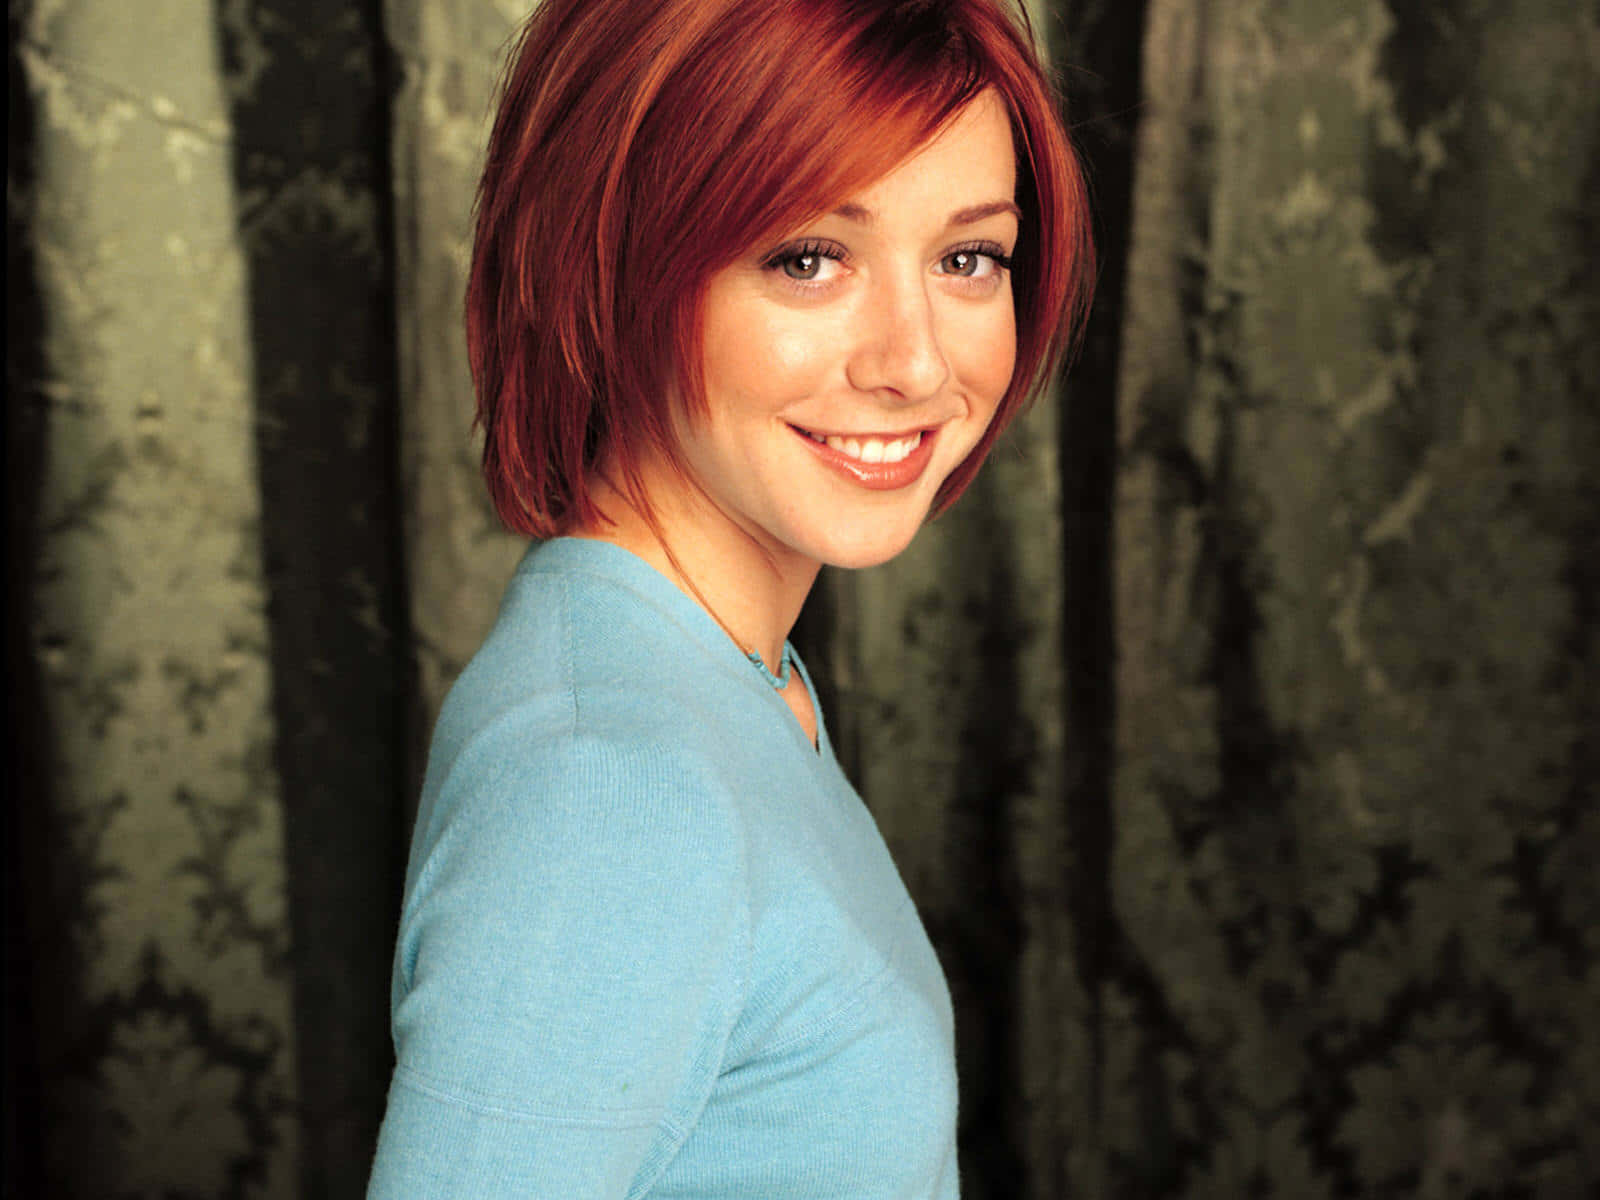 Alyson Hannigan striking a pose in a chic purple outfit Wallpaper